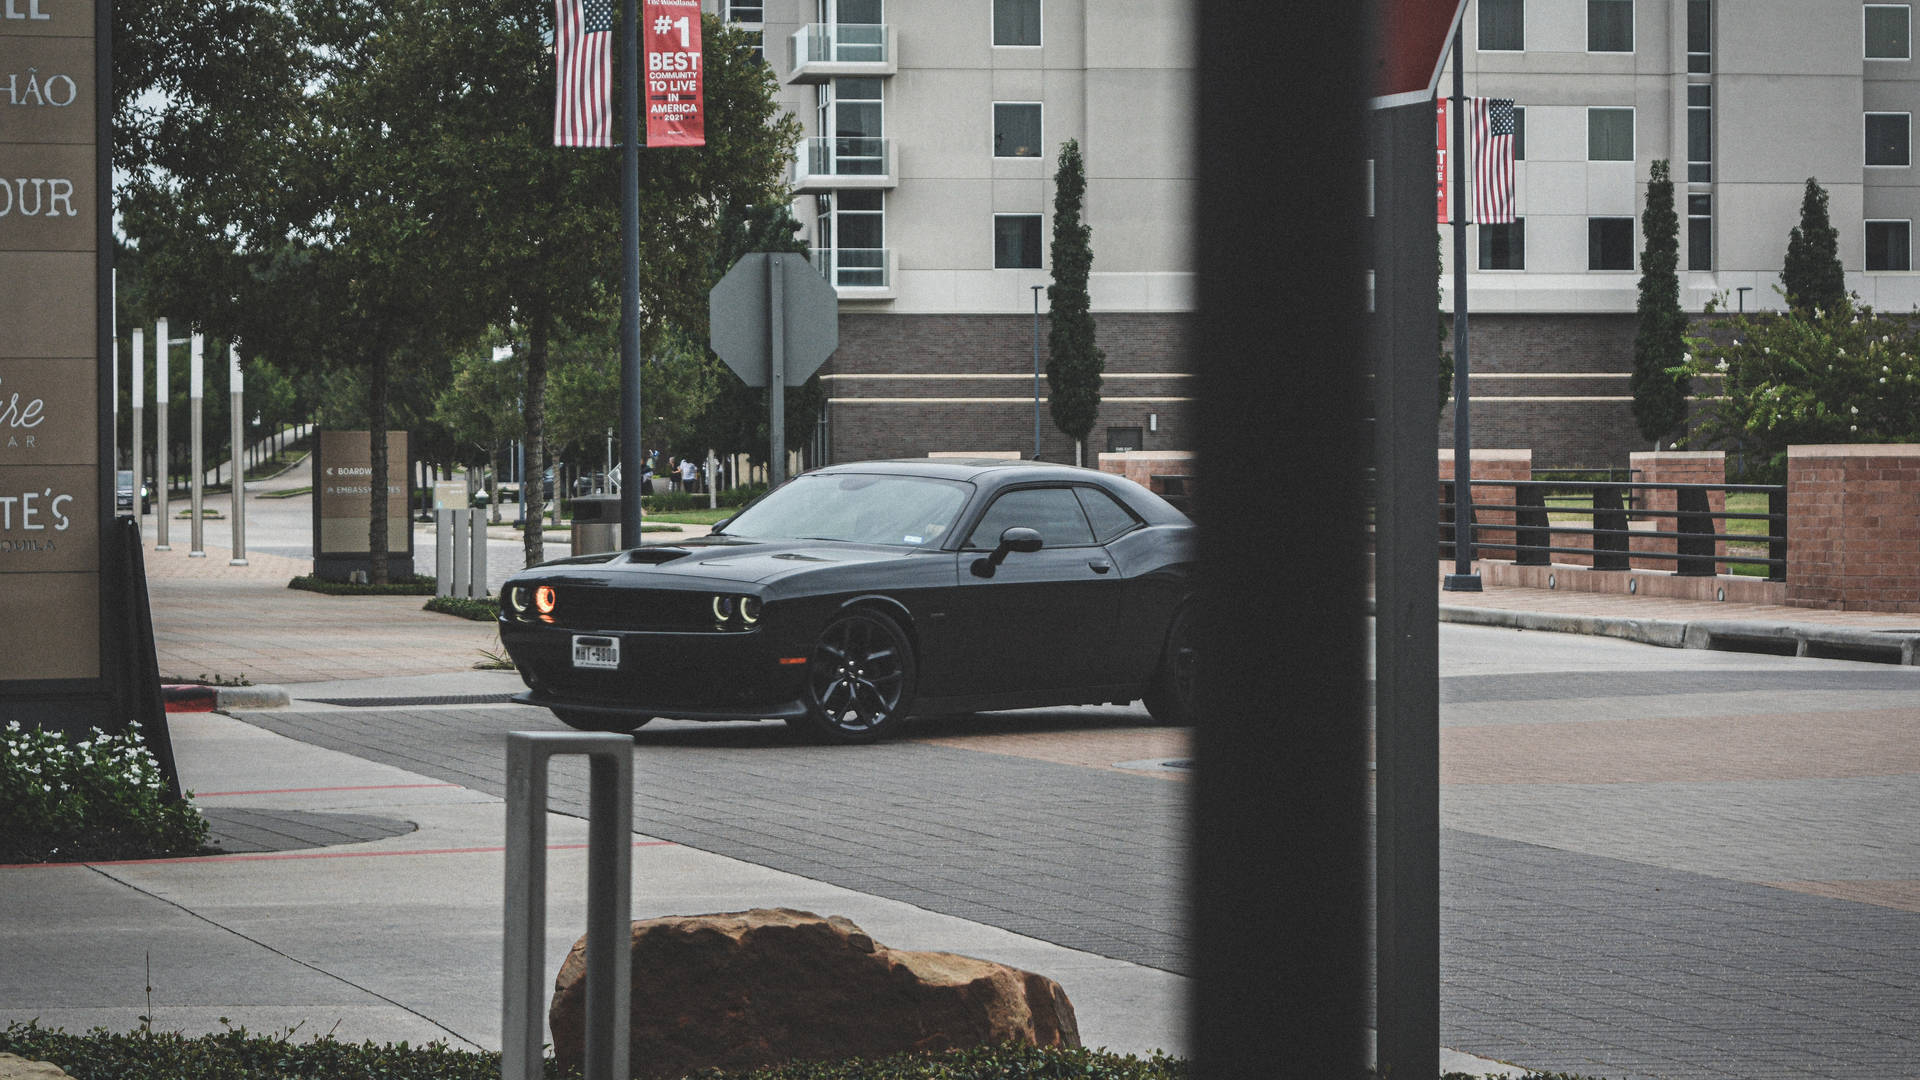 Dodge Challenger In The City Background